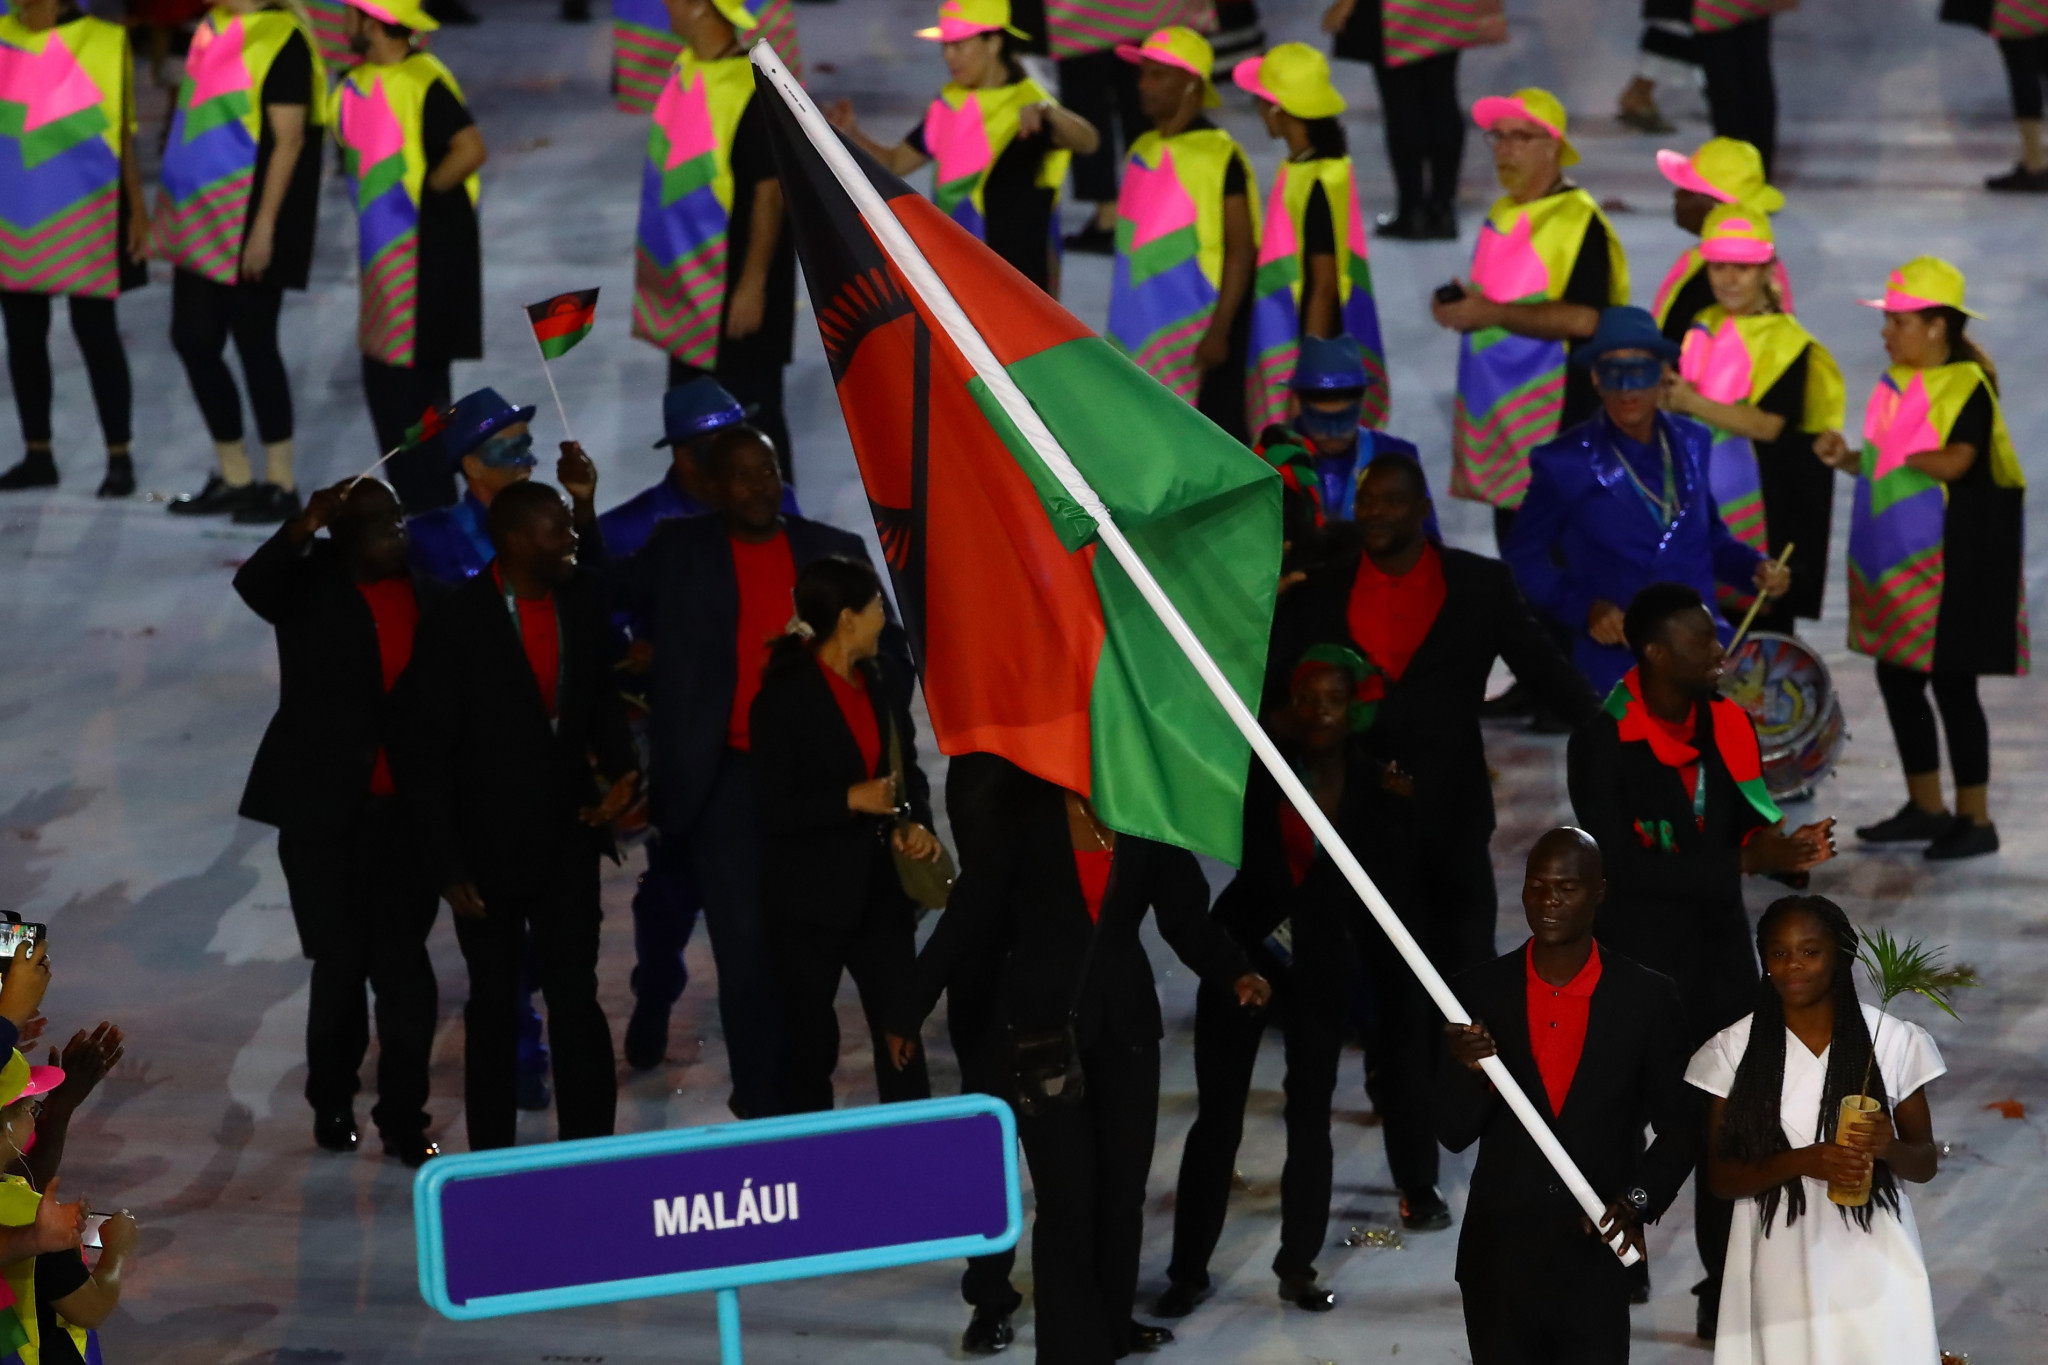 Malawi Olympic Committee to host workshop in strategic planning